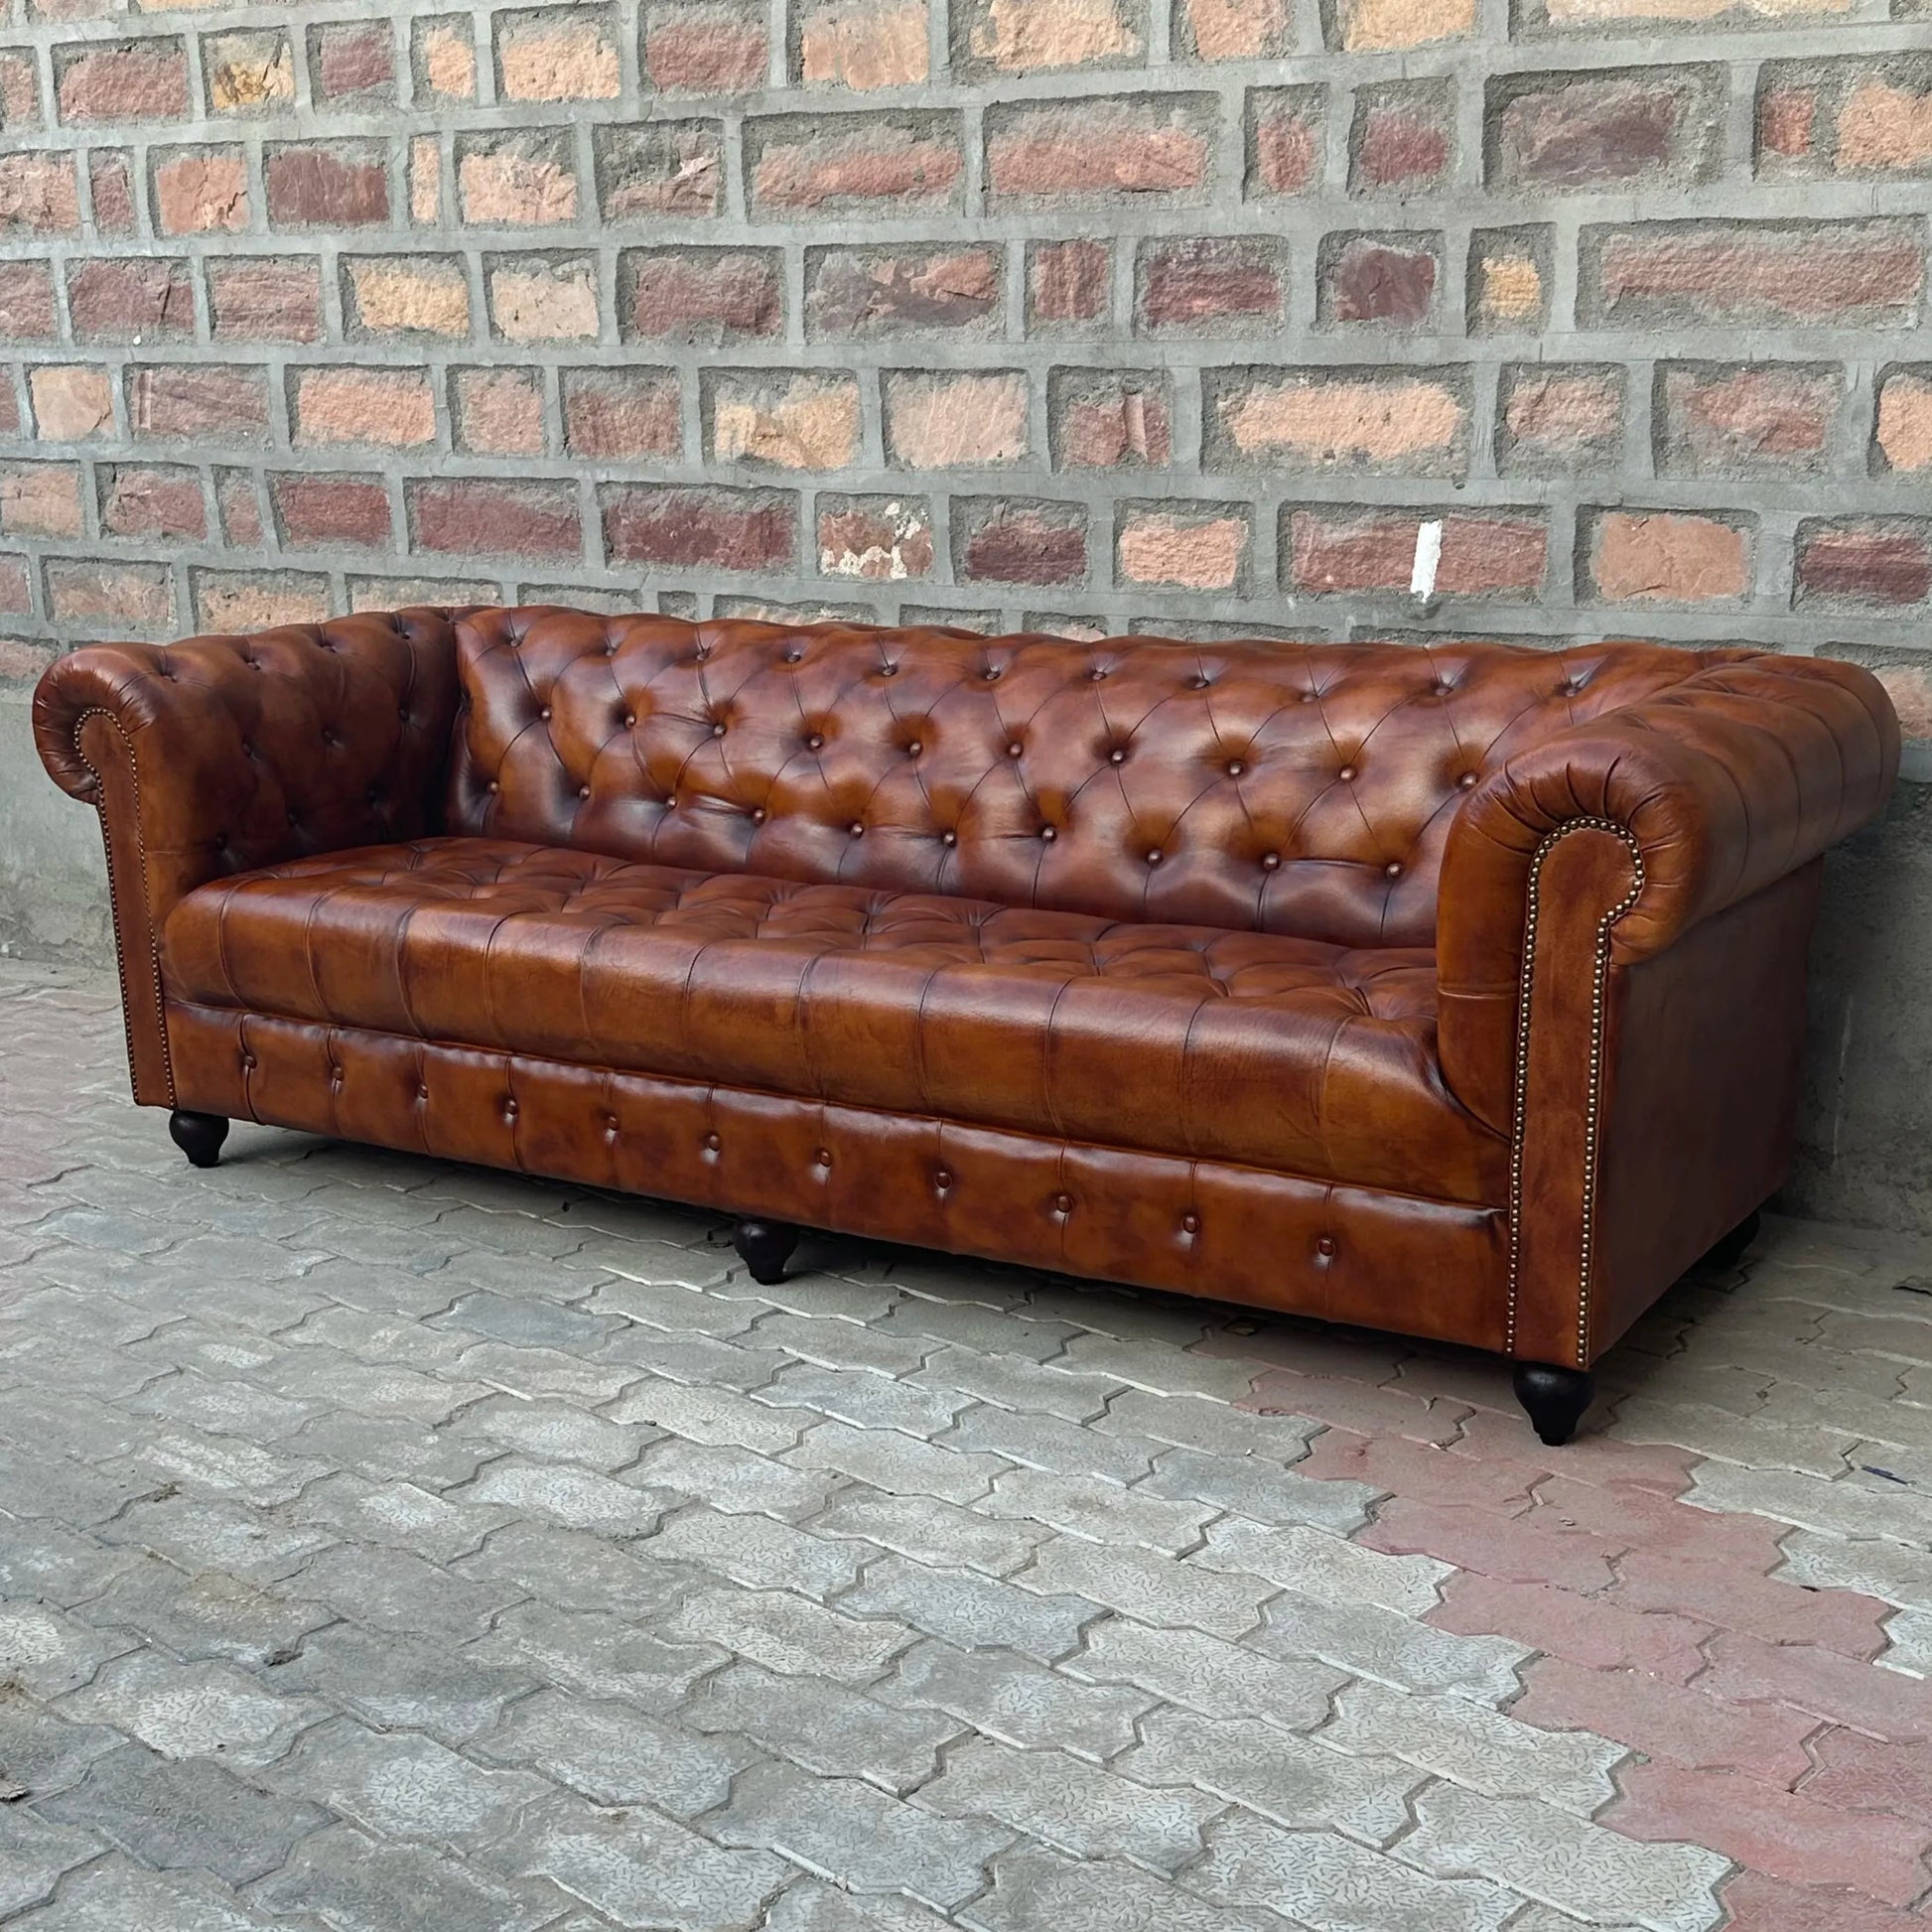 95" Sofa Tufted Bench | Laramie Chesterfield Leather Sofa with Tufted Bench Seat (LA-4T) by Rising Tide Design Co.